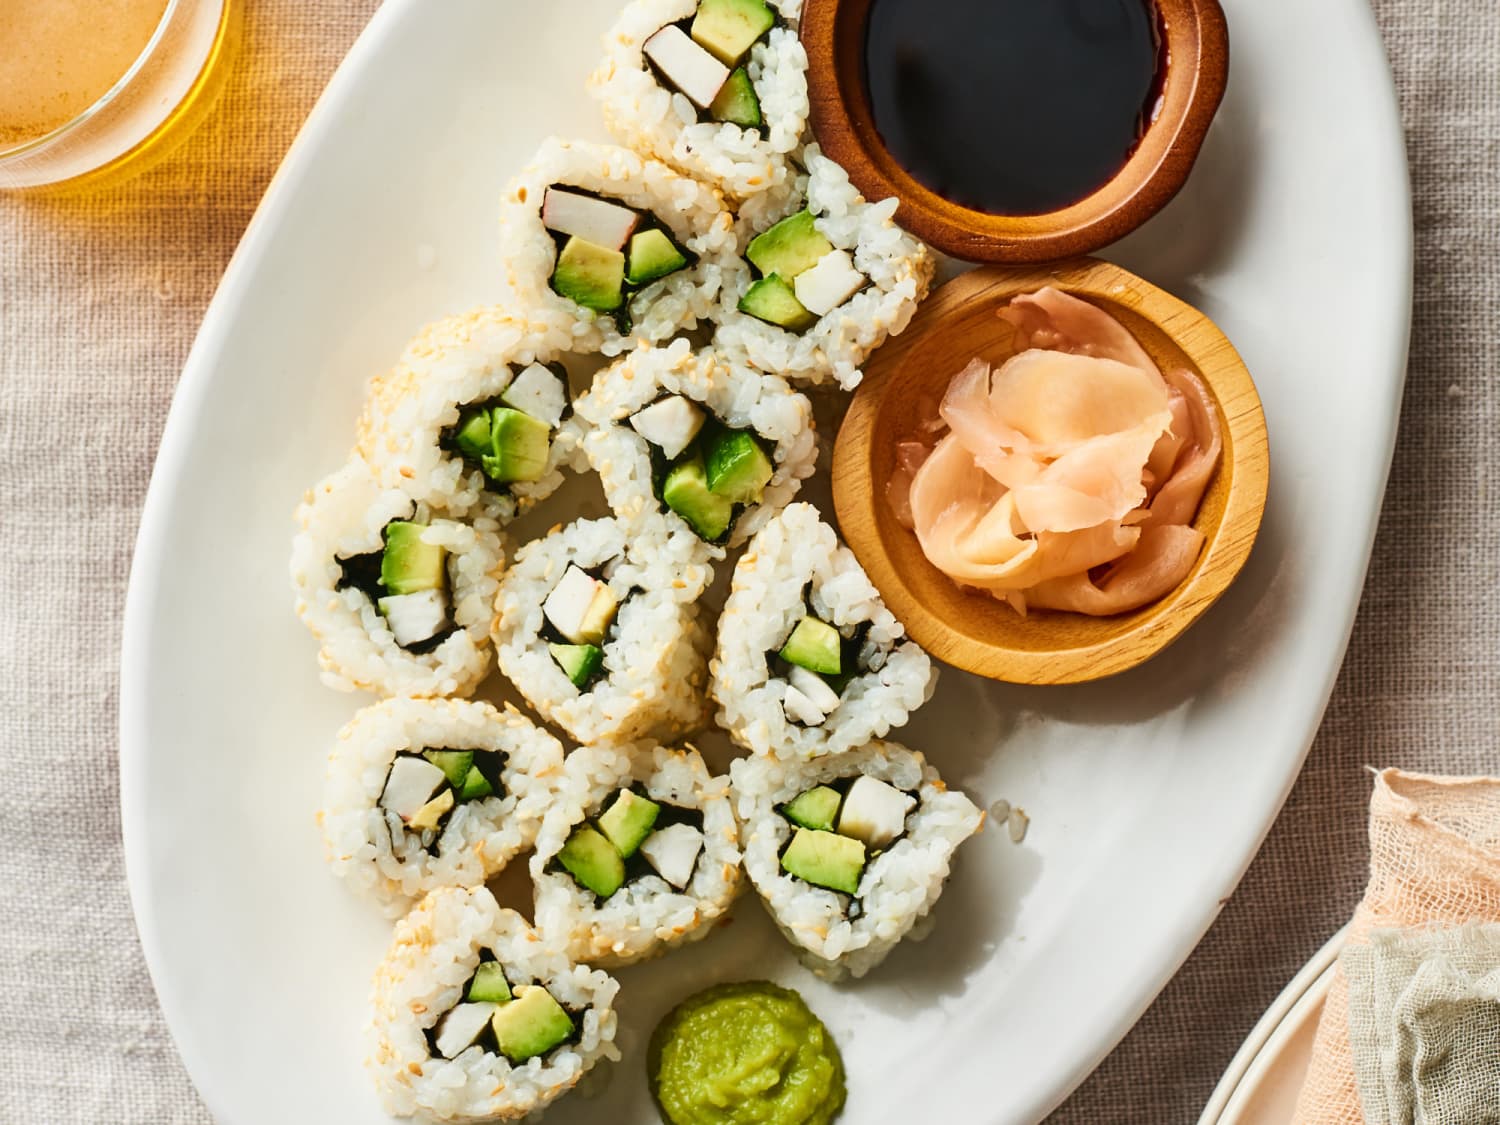 https://cdn.apartmenttherapy.info/image/upload/f_jpg,q_auto:eco,c_fill,g_auto,w_1500,ar_4:3/k%2FPhoto%2FRecipes%2F2019-08-how-to-california-roll%2F2019-07-15_Kitchn77337_How-To-Make-Sushi